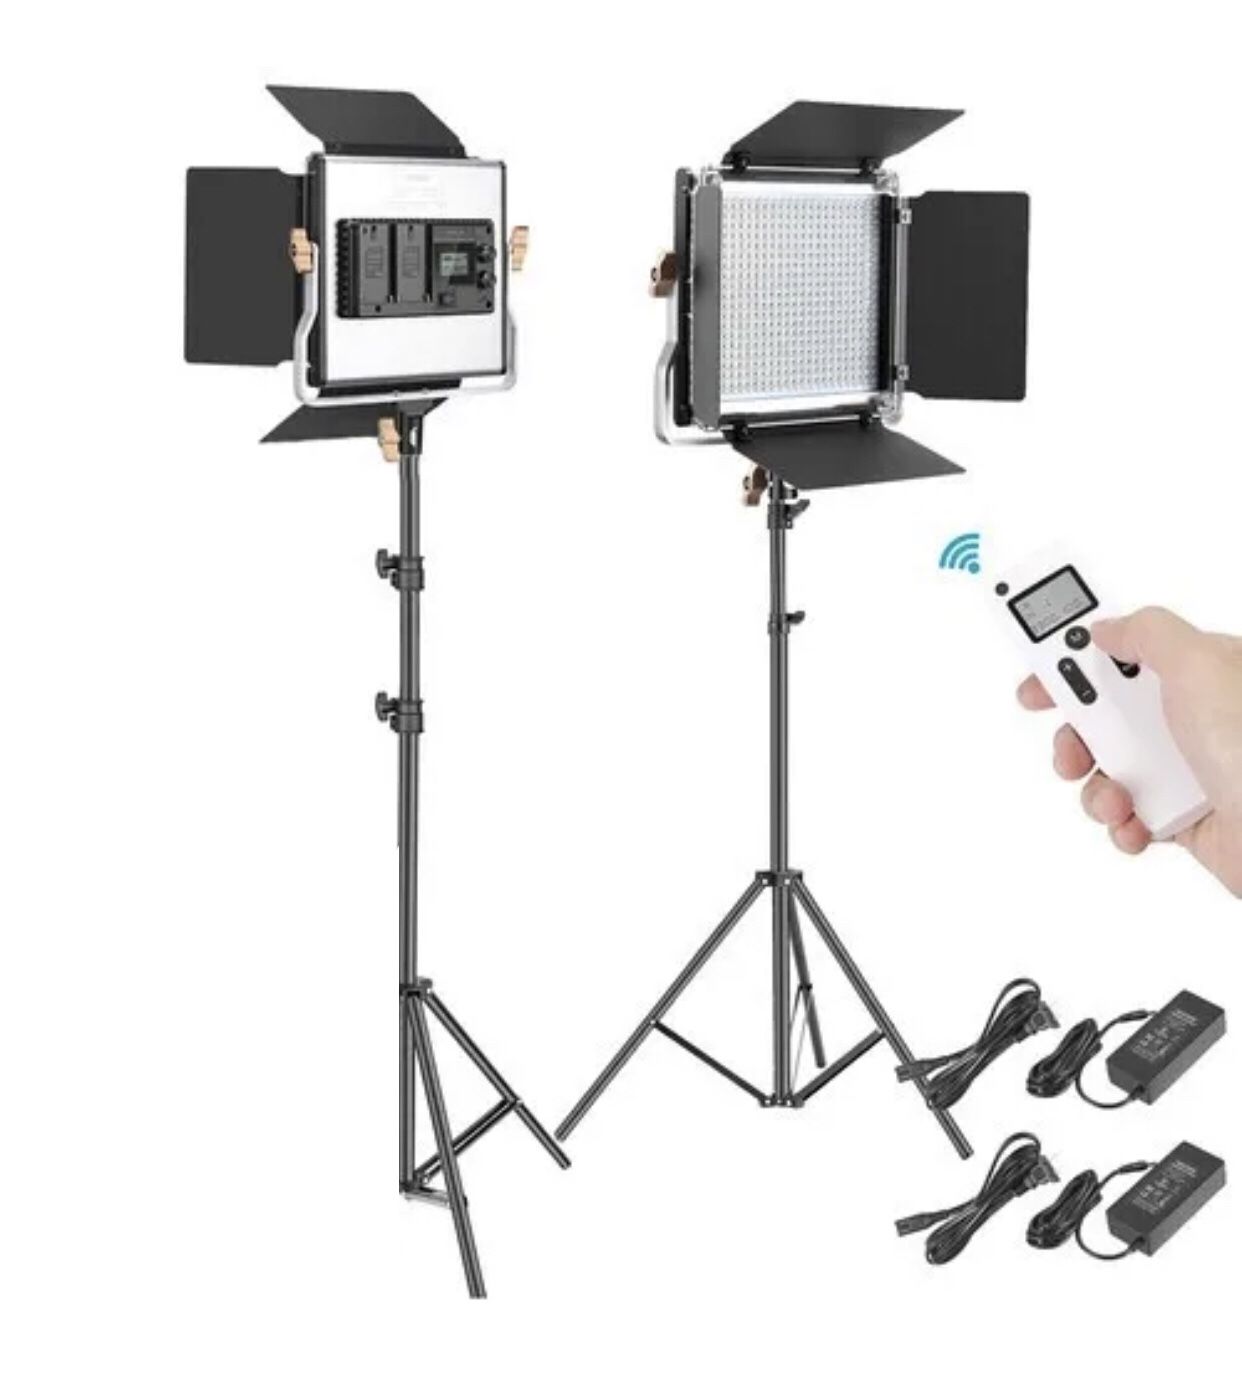 NEW! Neewer Advanced 2.4 GHz 480 Bi-Color LED Video 2-Light KIT With Diffusers, Stands, & Remote